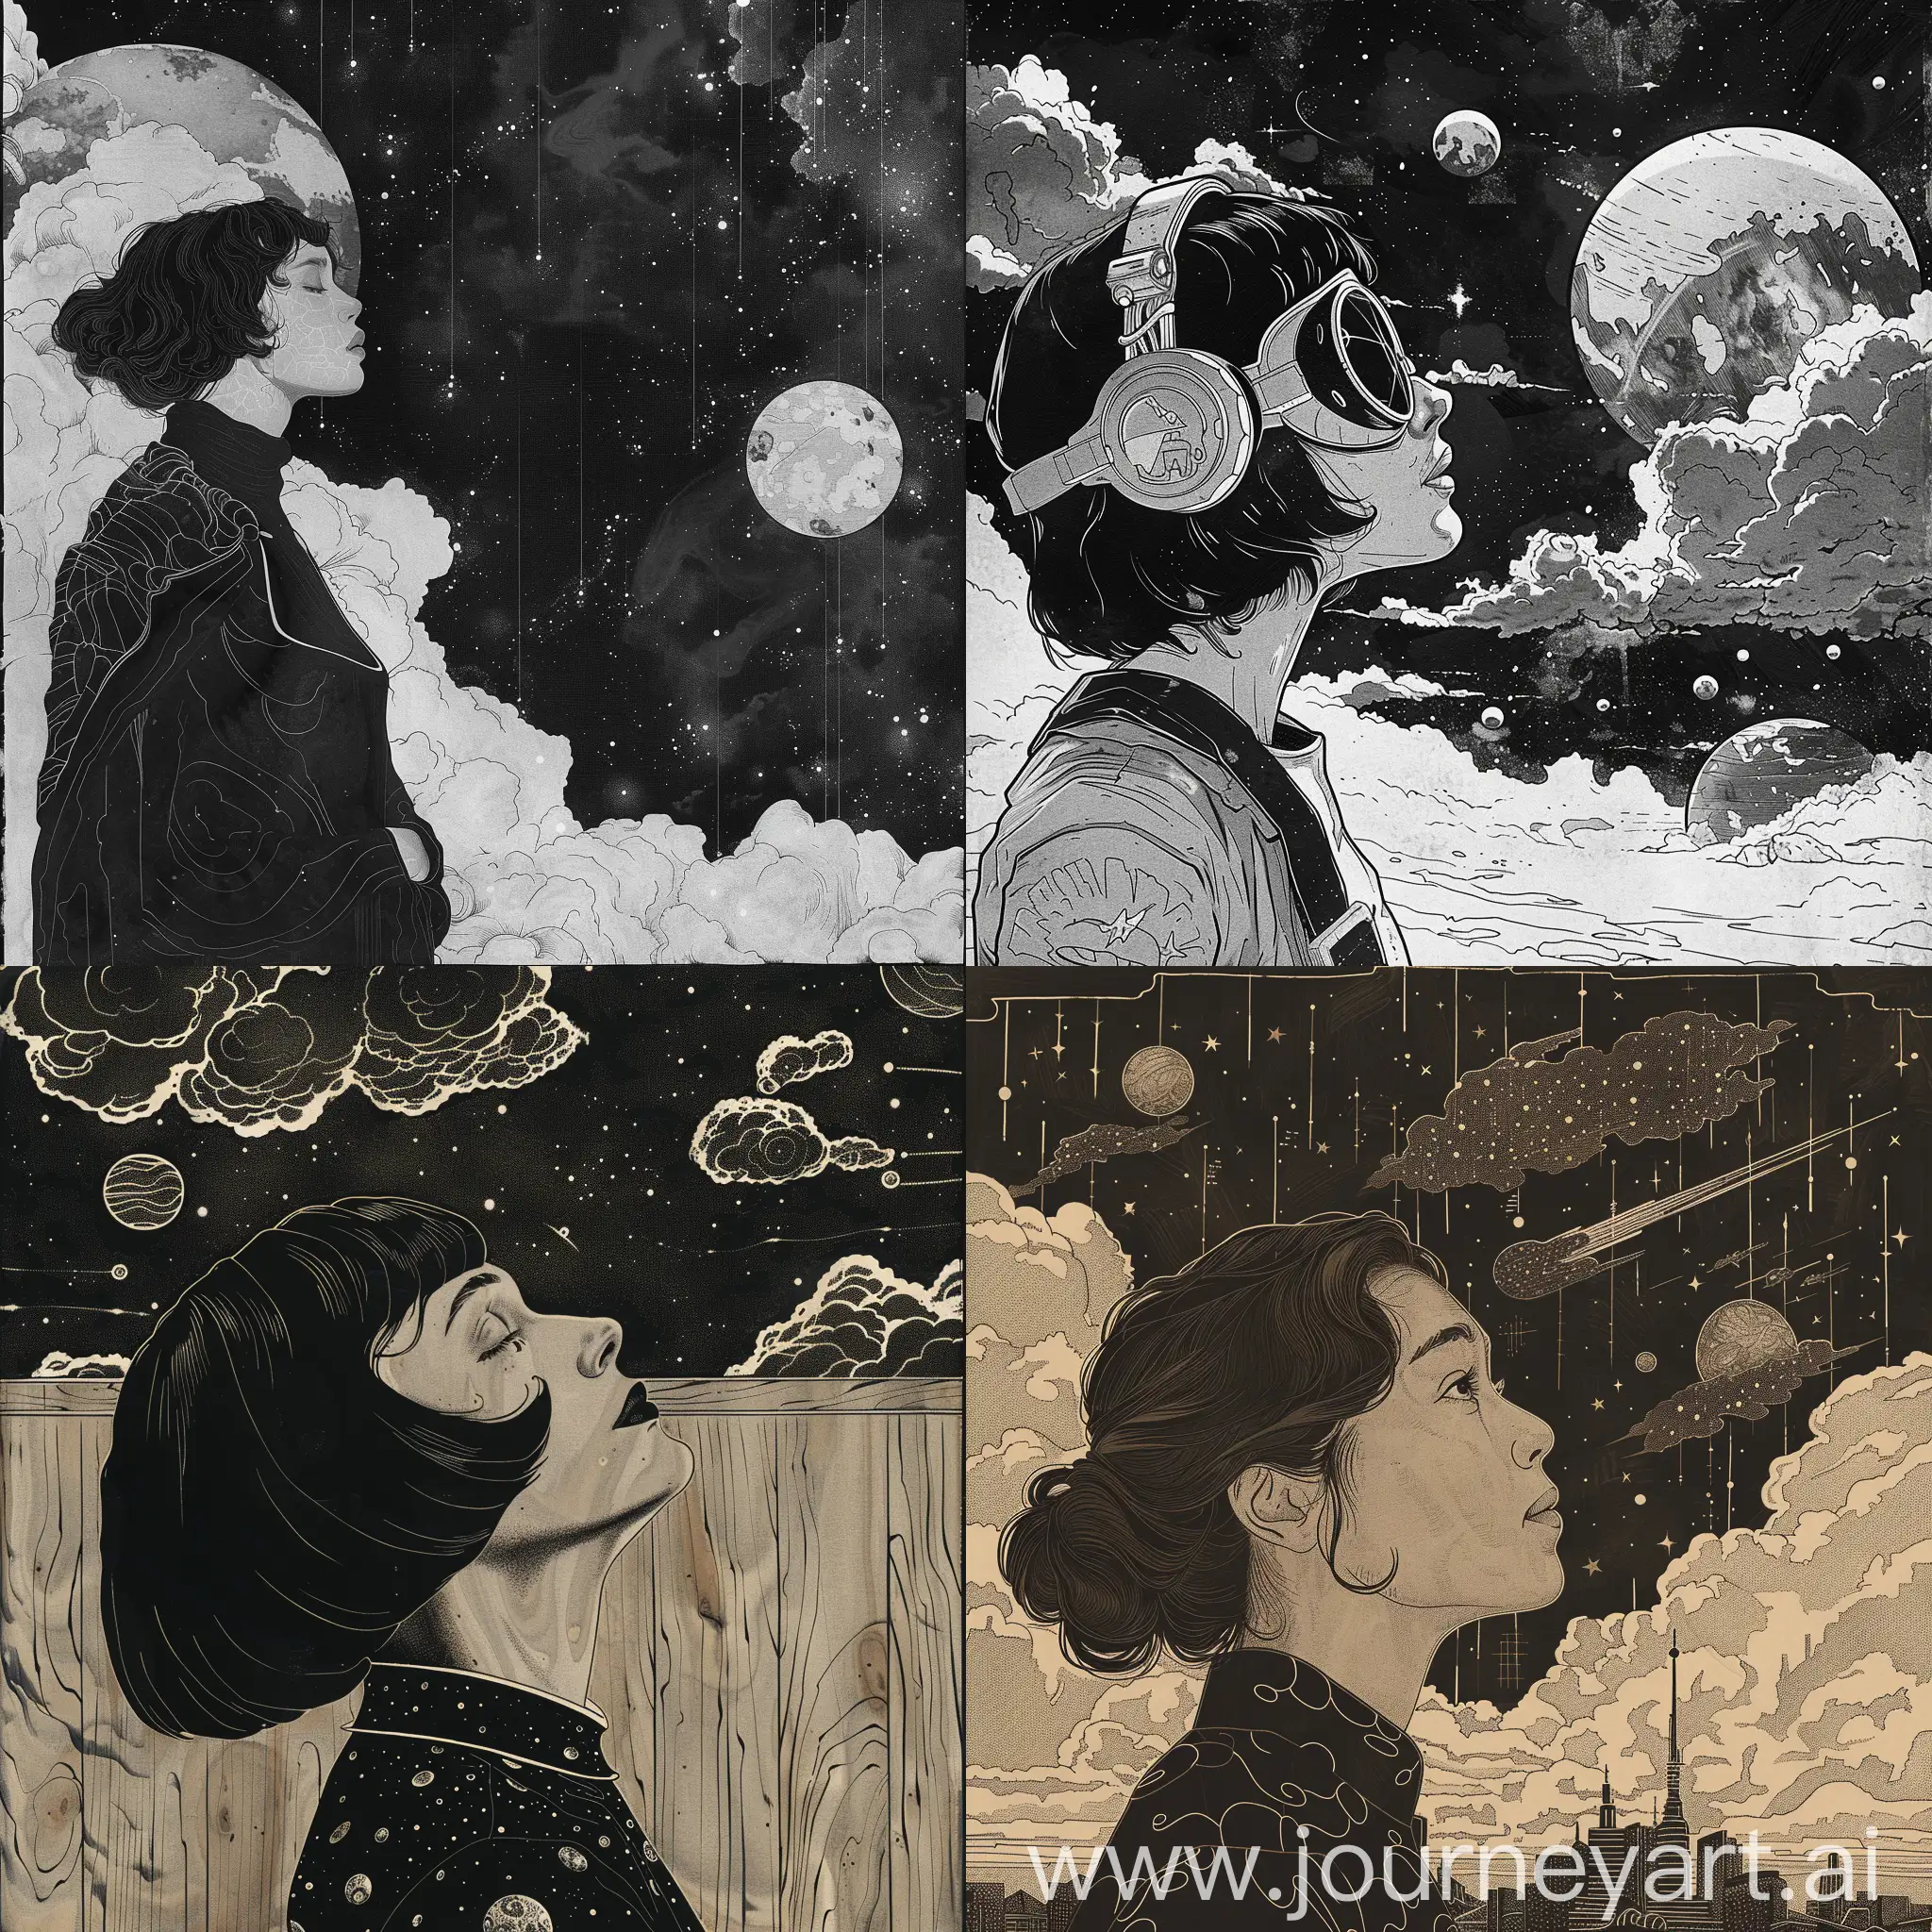 Detailed-Science-Fiction-Illustration-of-a-Woman-with-Monotone-Trace-High-Contrast-Skies-and-Cosmic-Symbolism